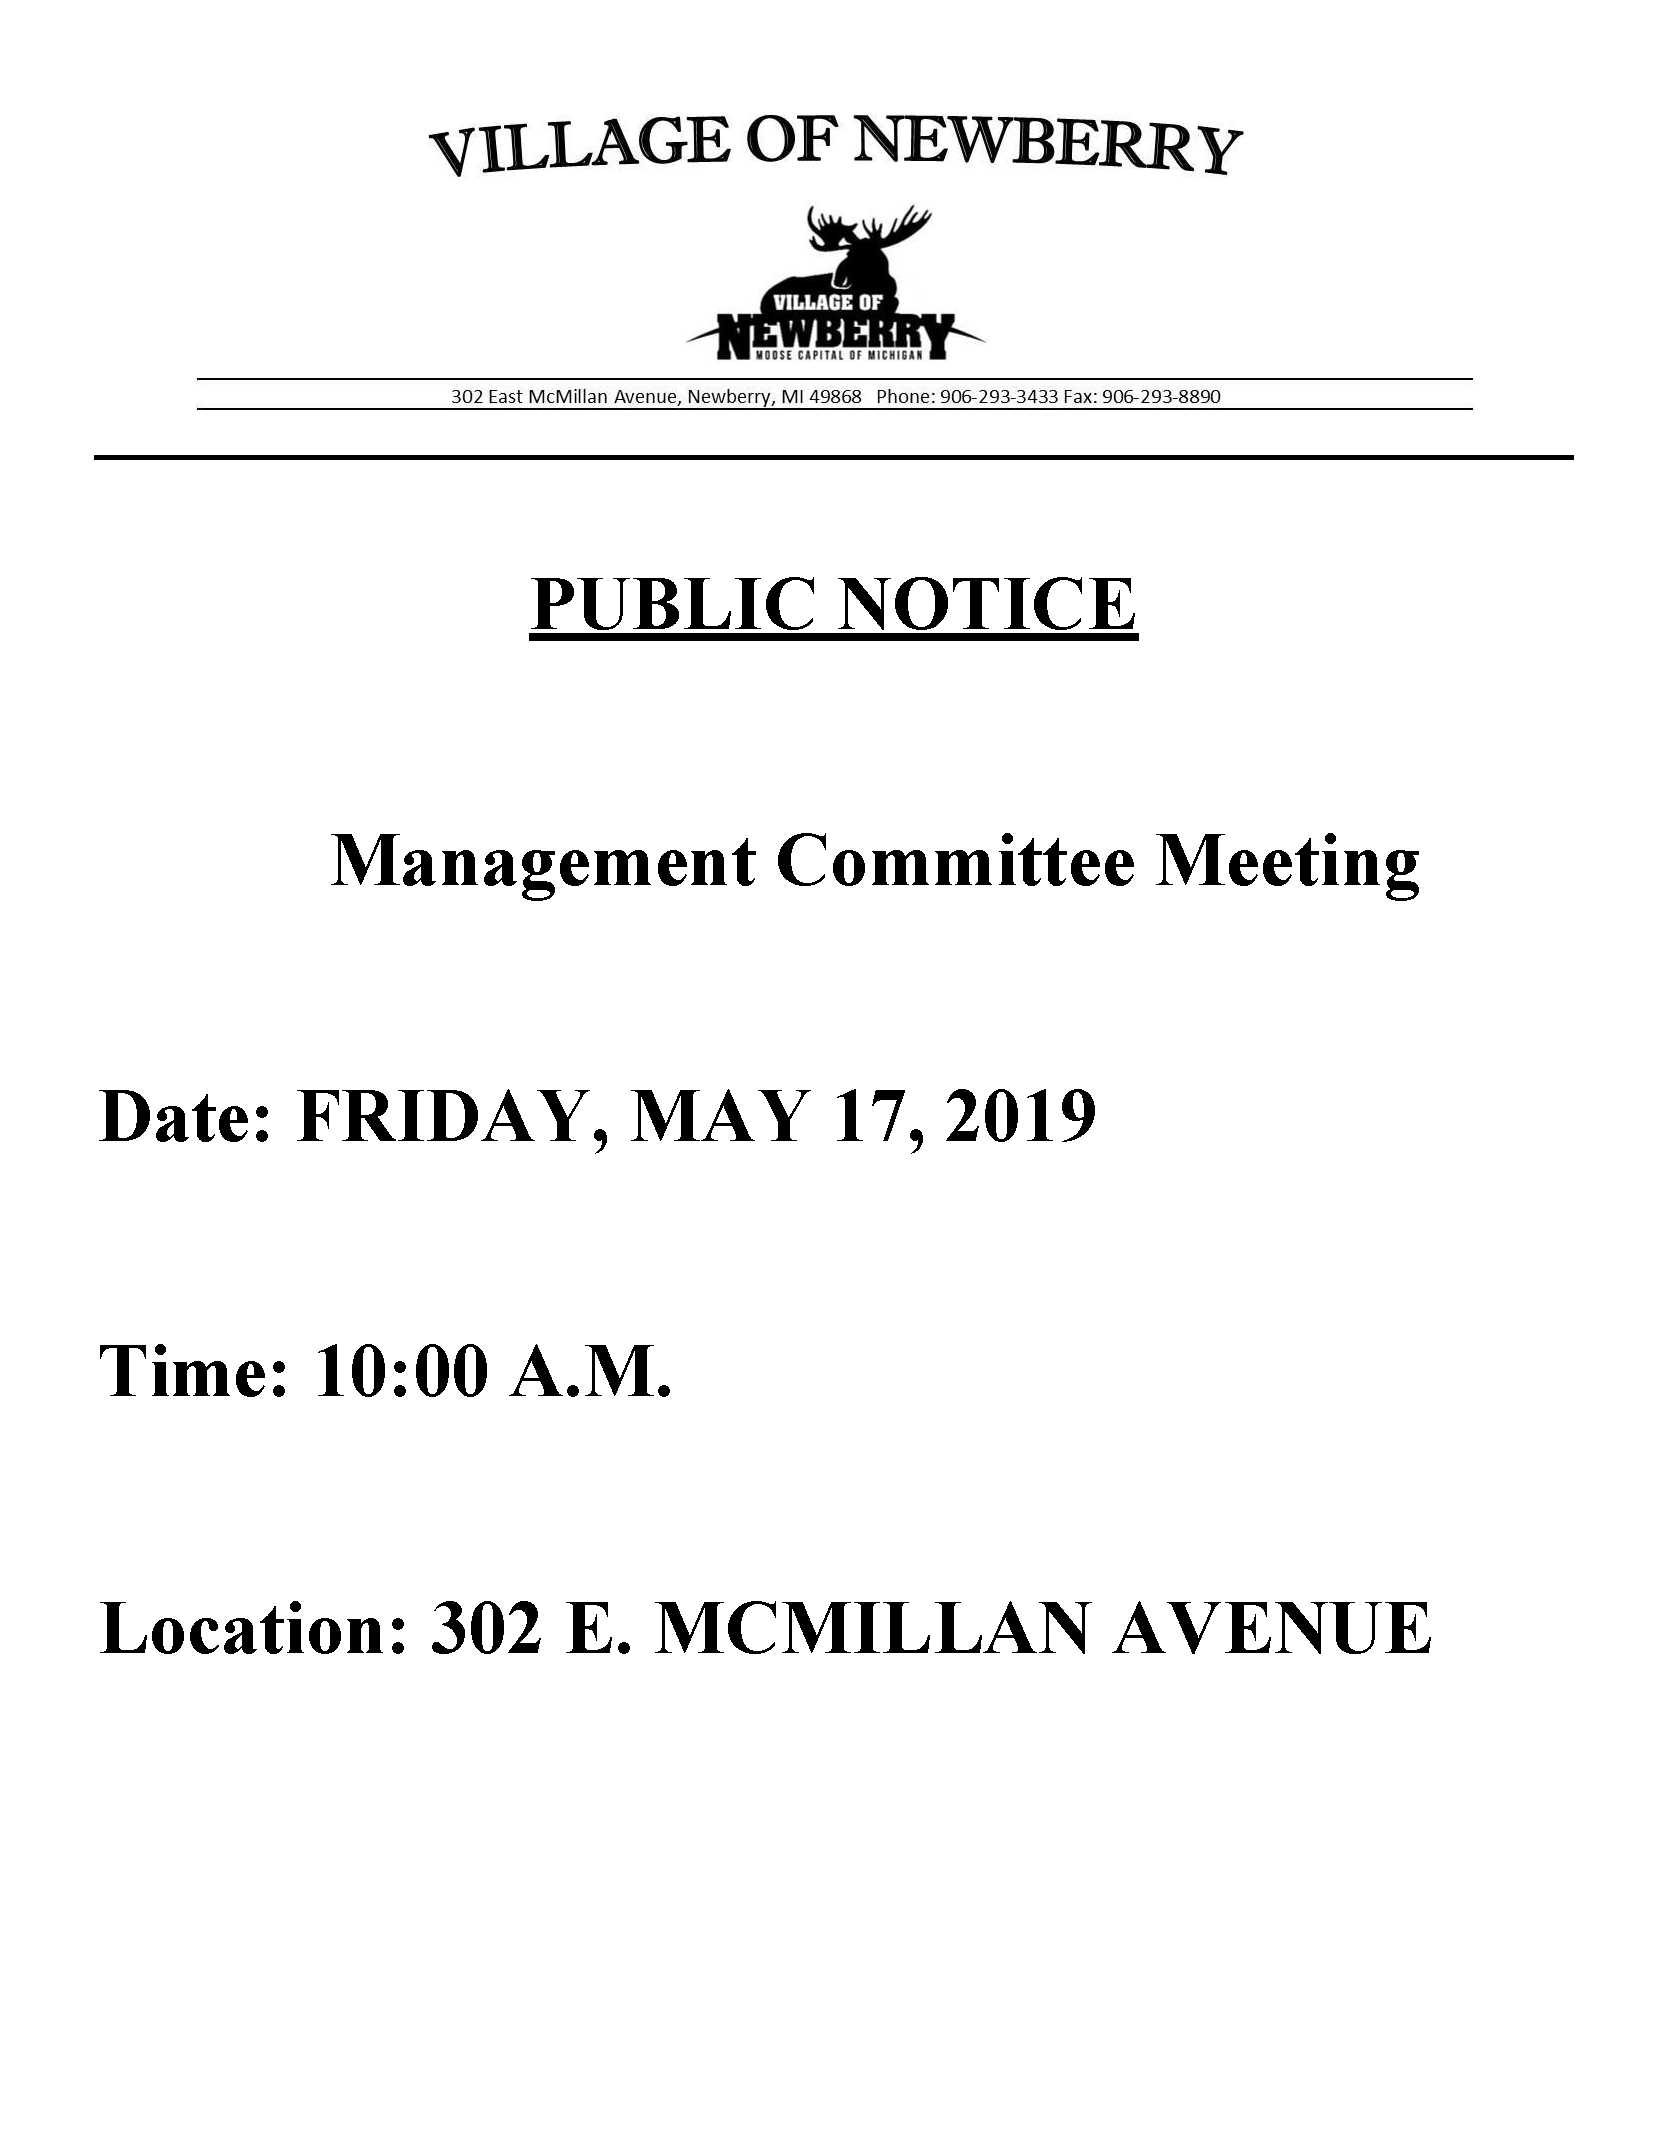 Management_Committee_Meeting_Notice_5.17